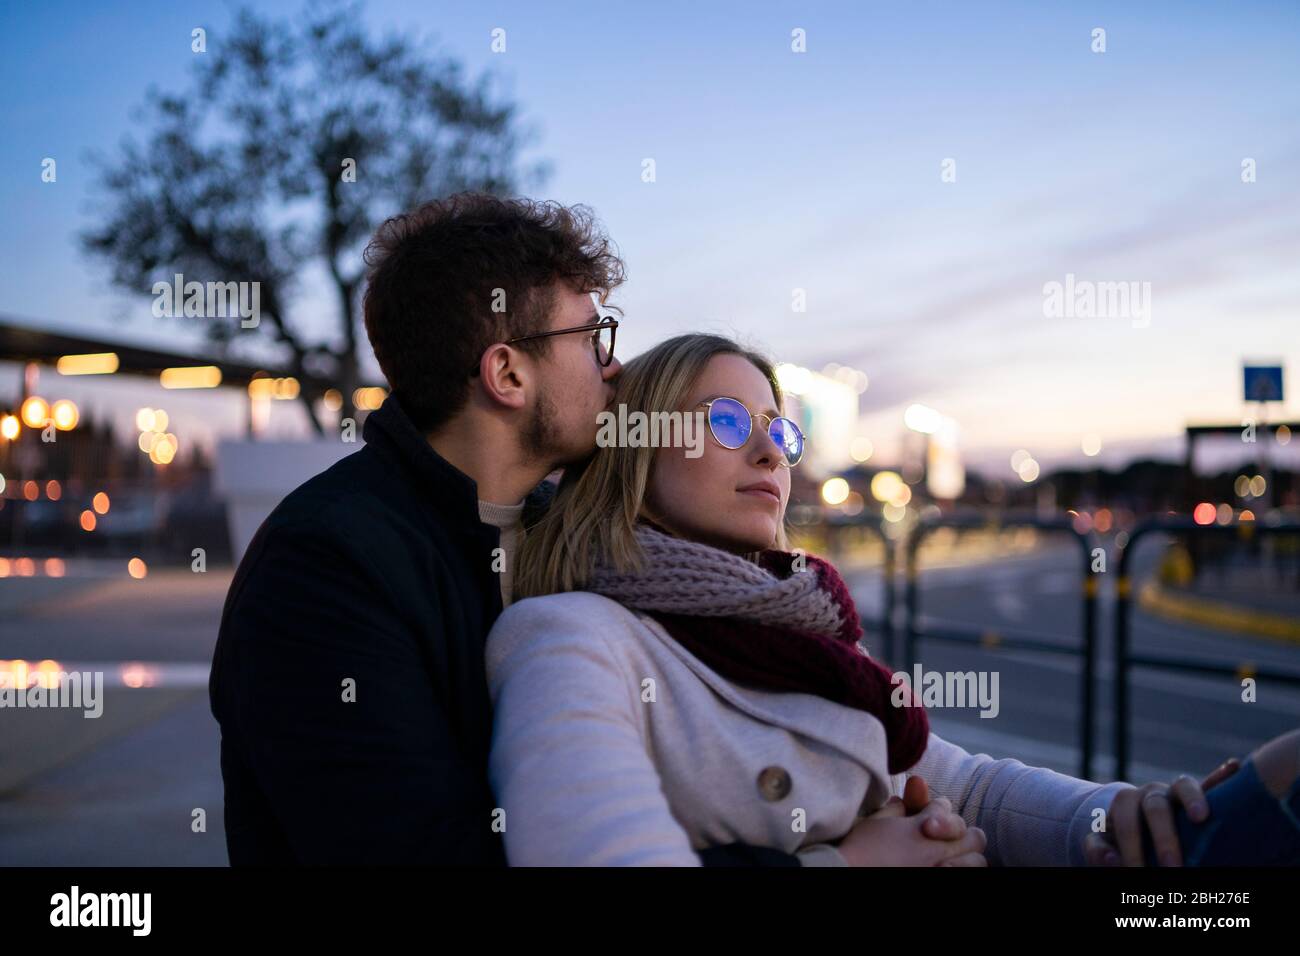 Young couple in love at evening twilight Stock Photo